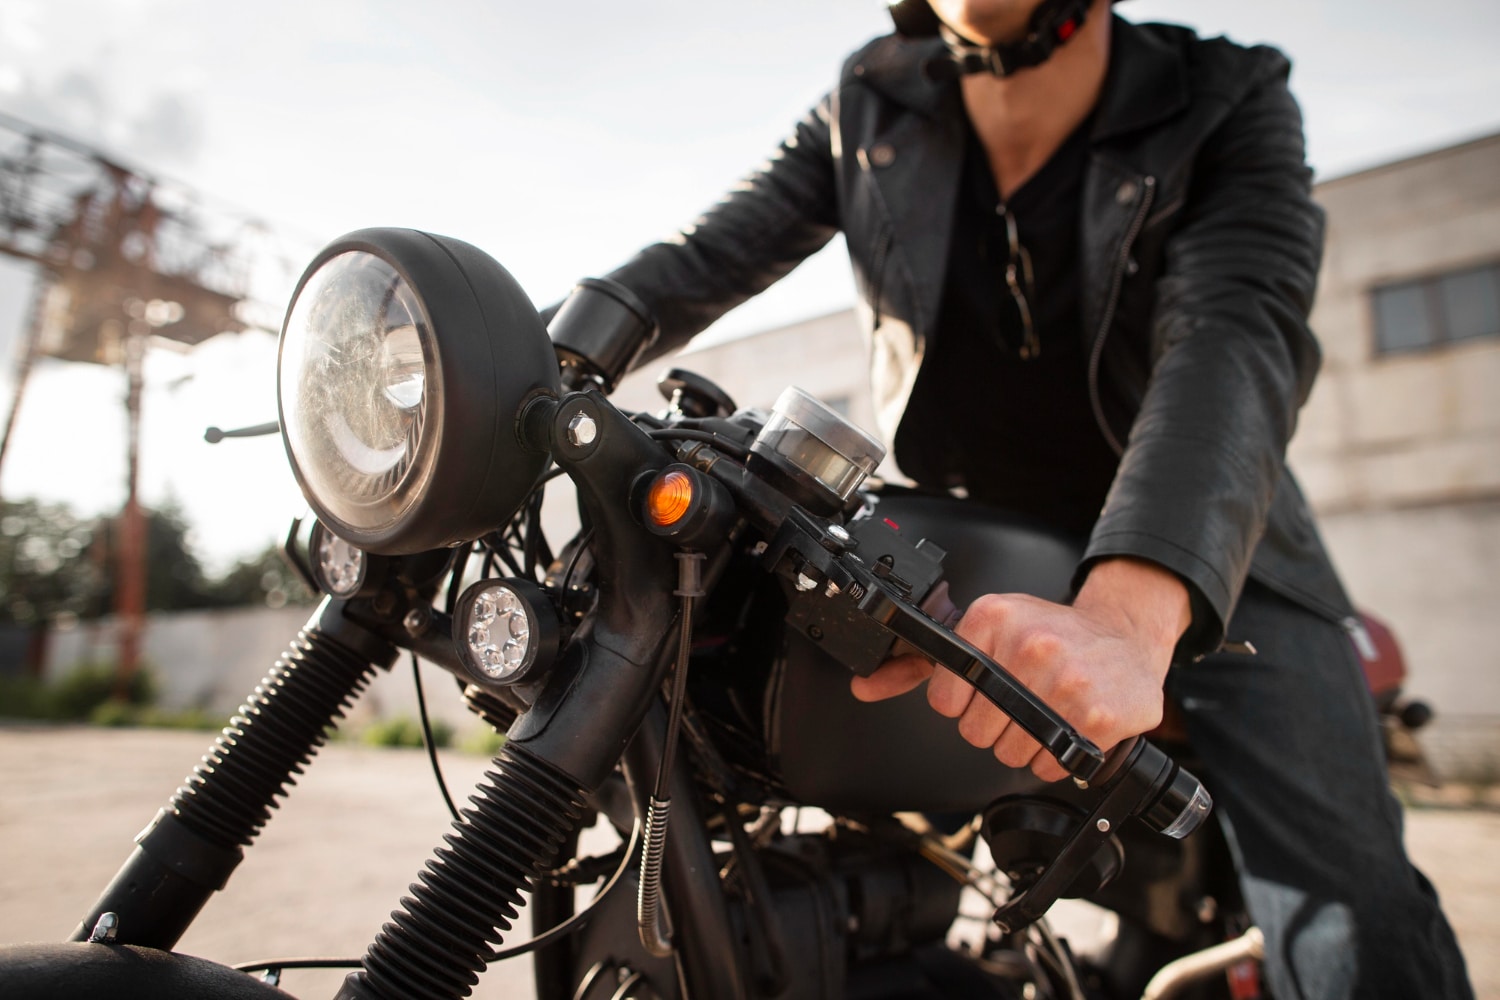 RevZilla Gear Up for the Ride: Motorcycle Apparel and Accessories